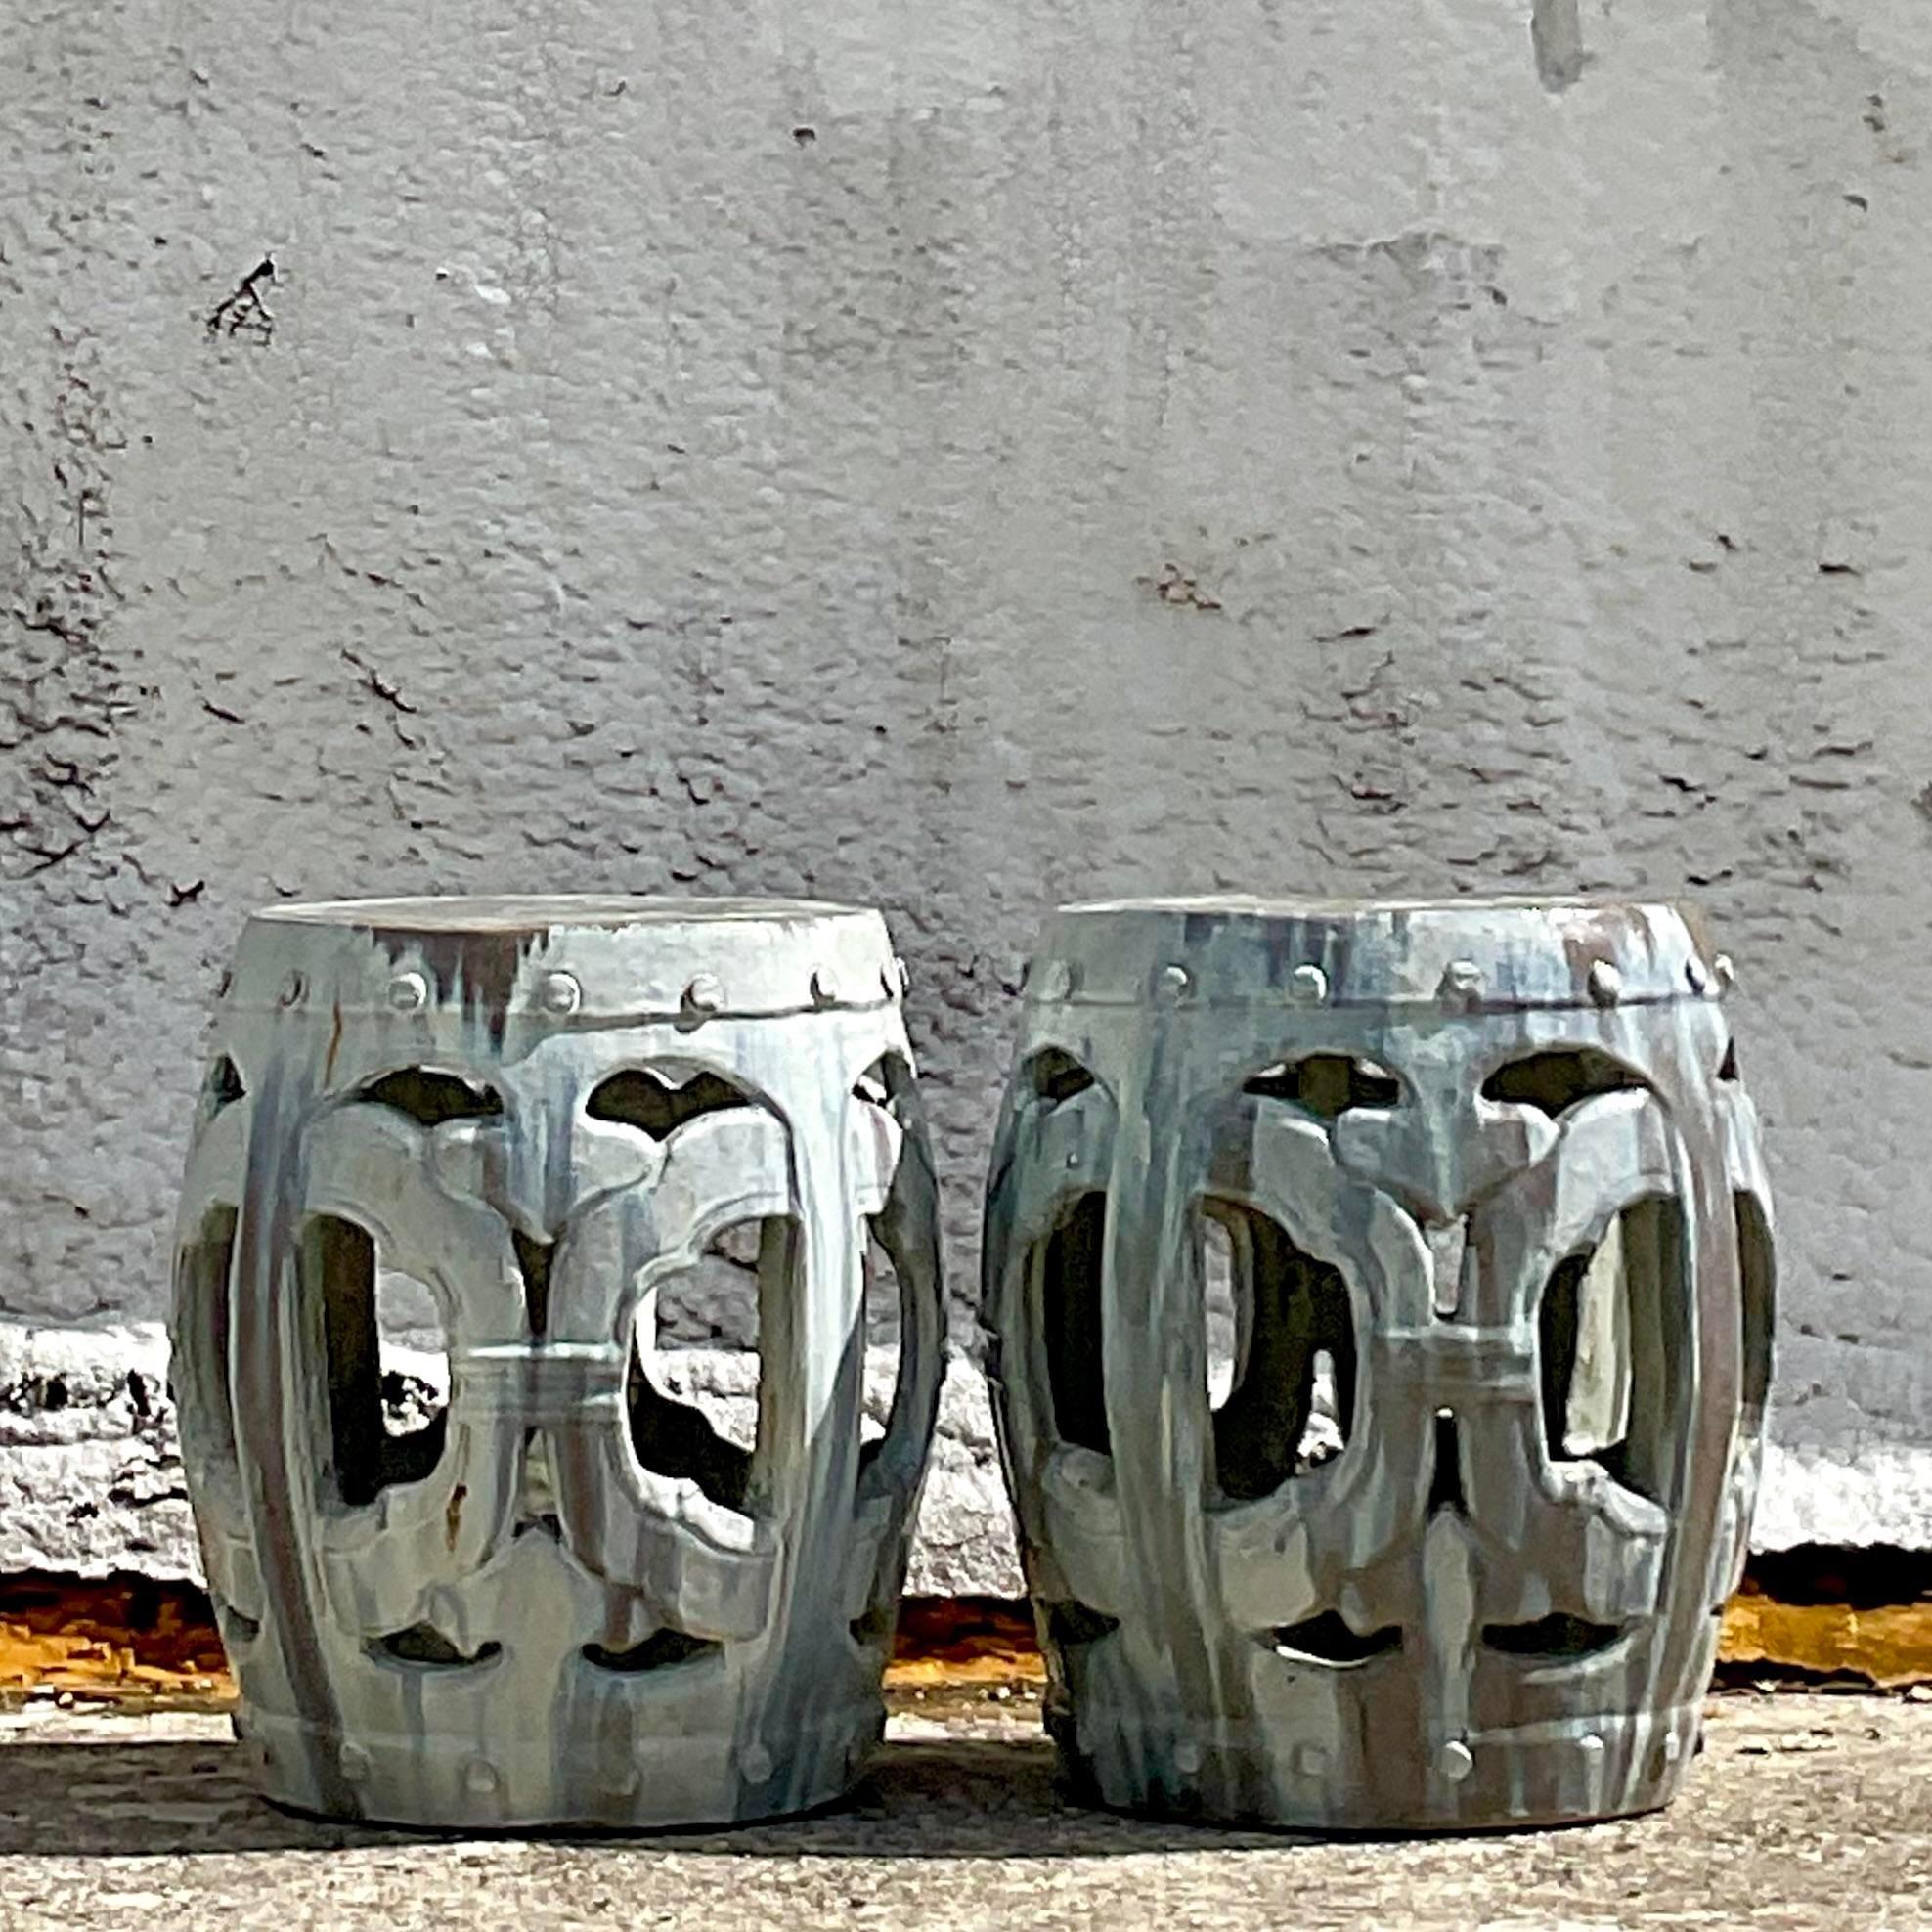 Chinese Vintage Boho Glazed Ceramic Low Stools - a Pair For Sale